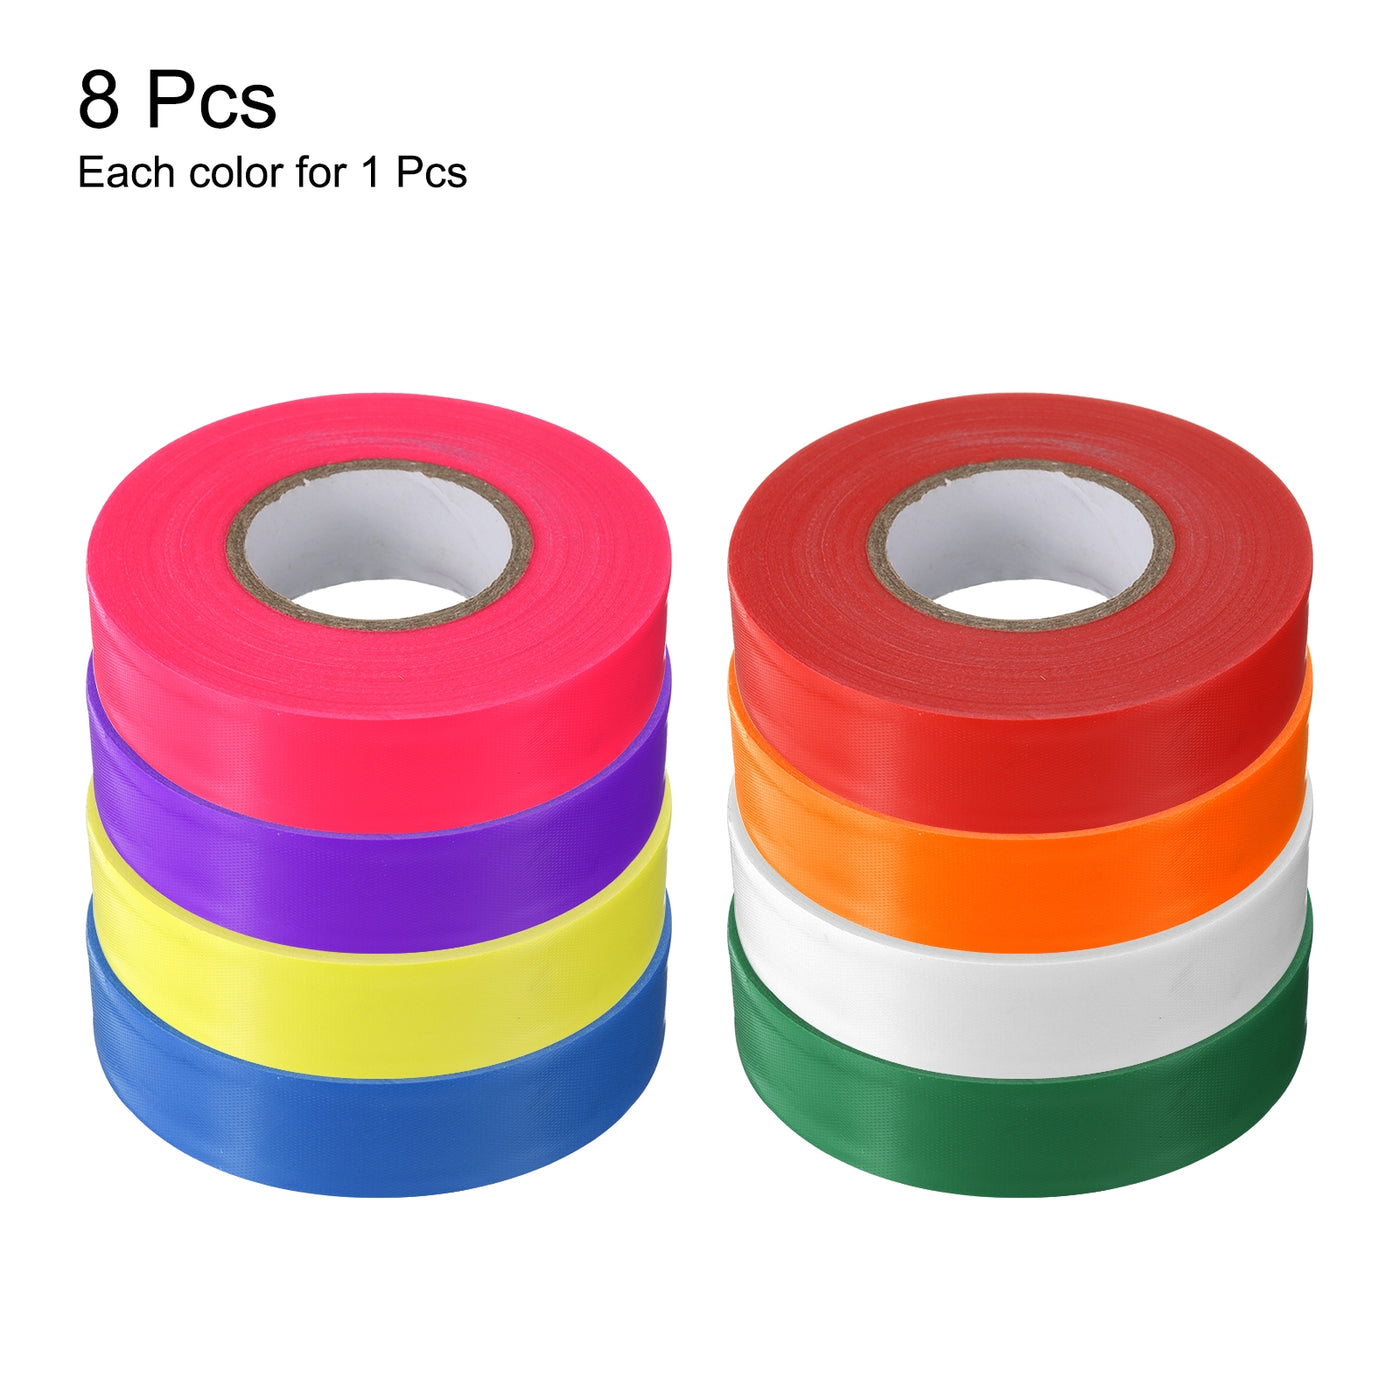 uxcell Uxcell PVC Flagging Tape 20mm x 30m/98.4ft Marking Tape Non-Adhesive 8pcs